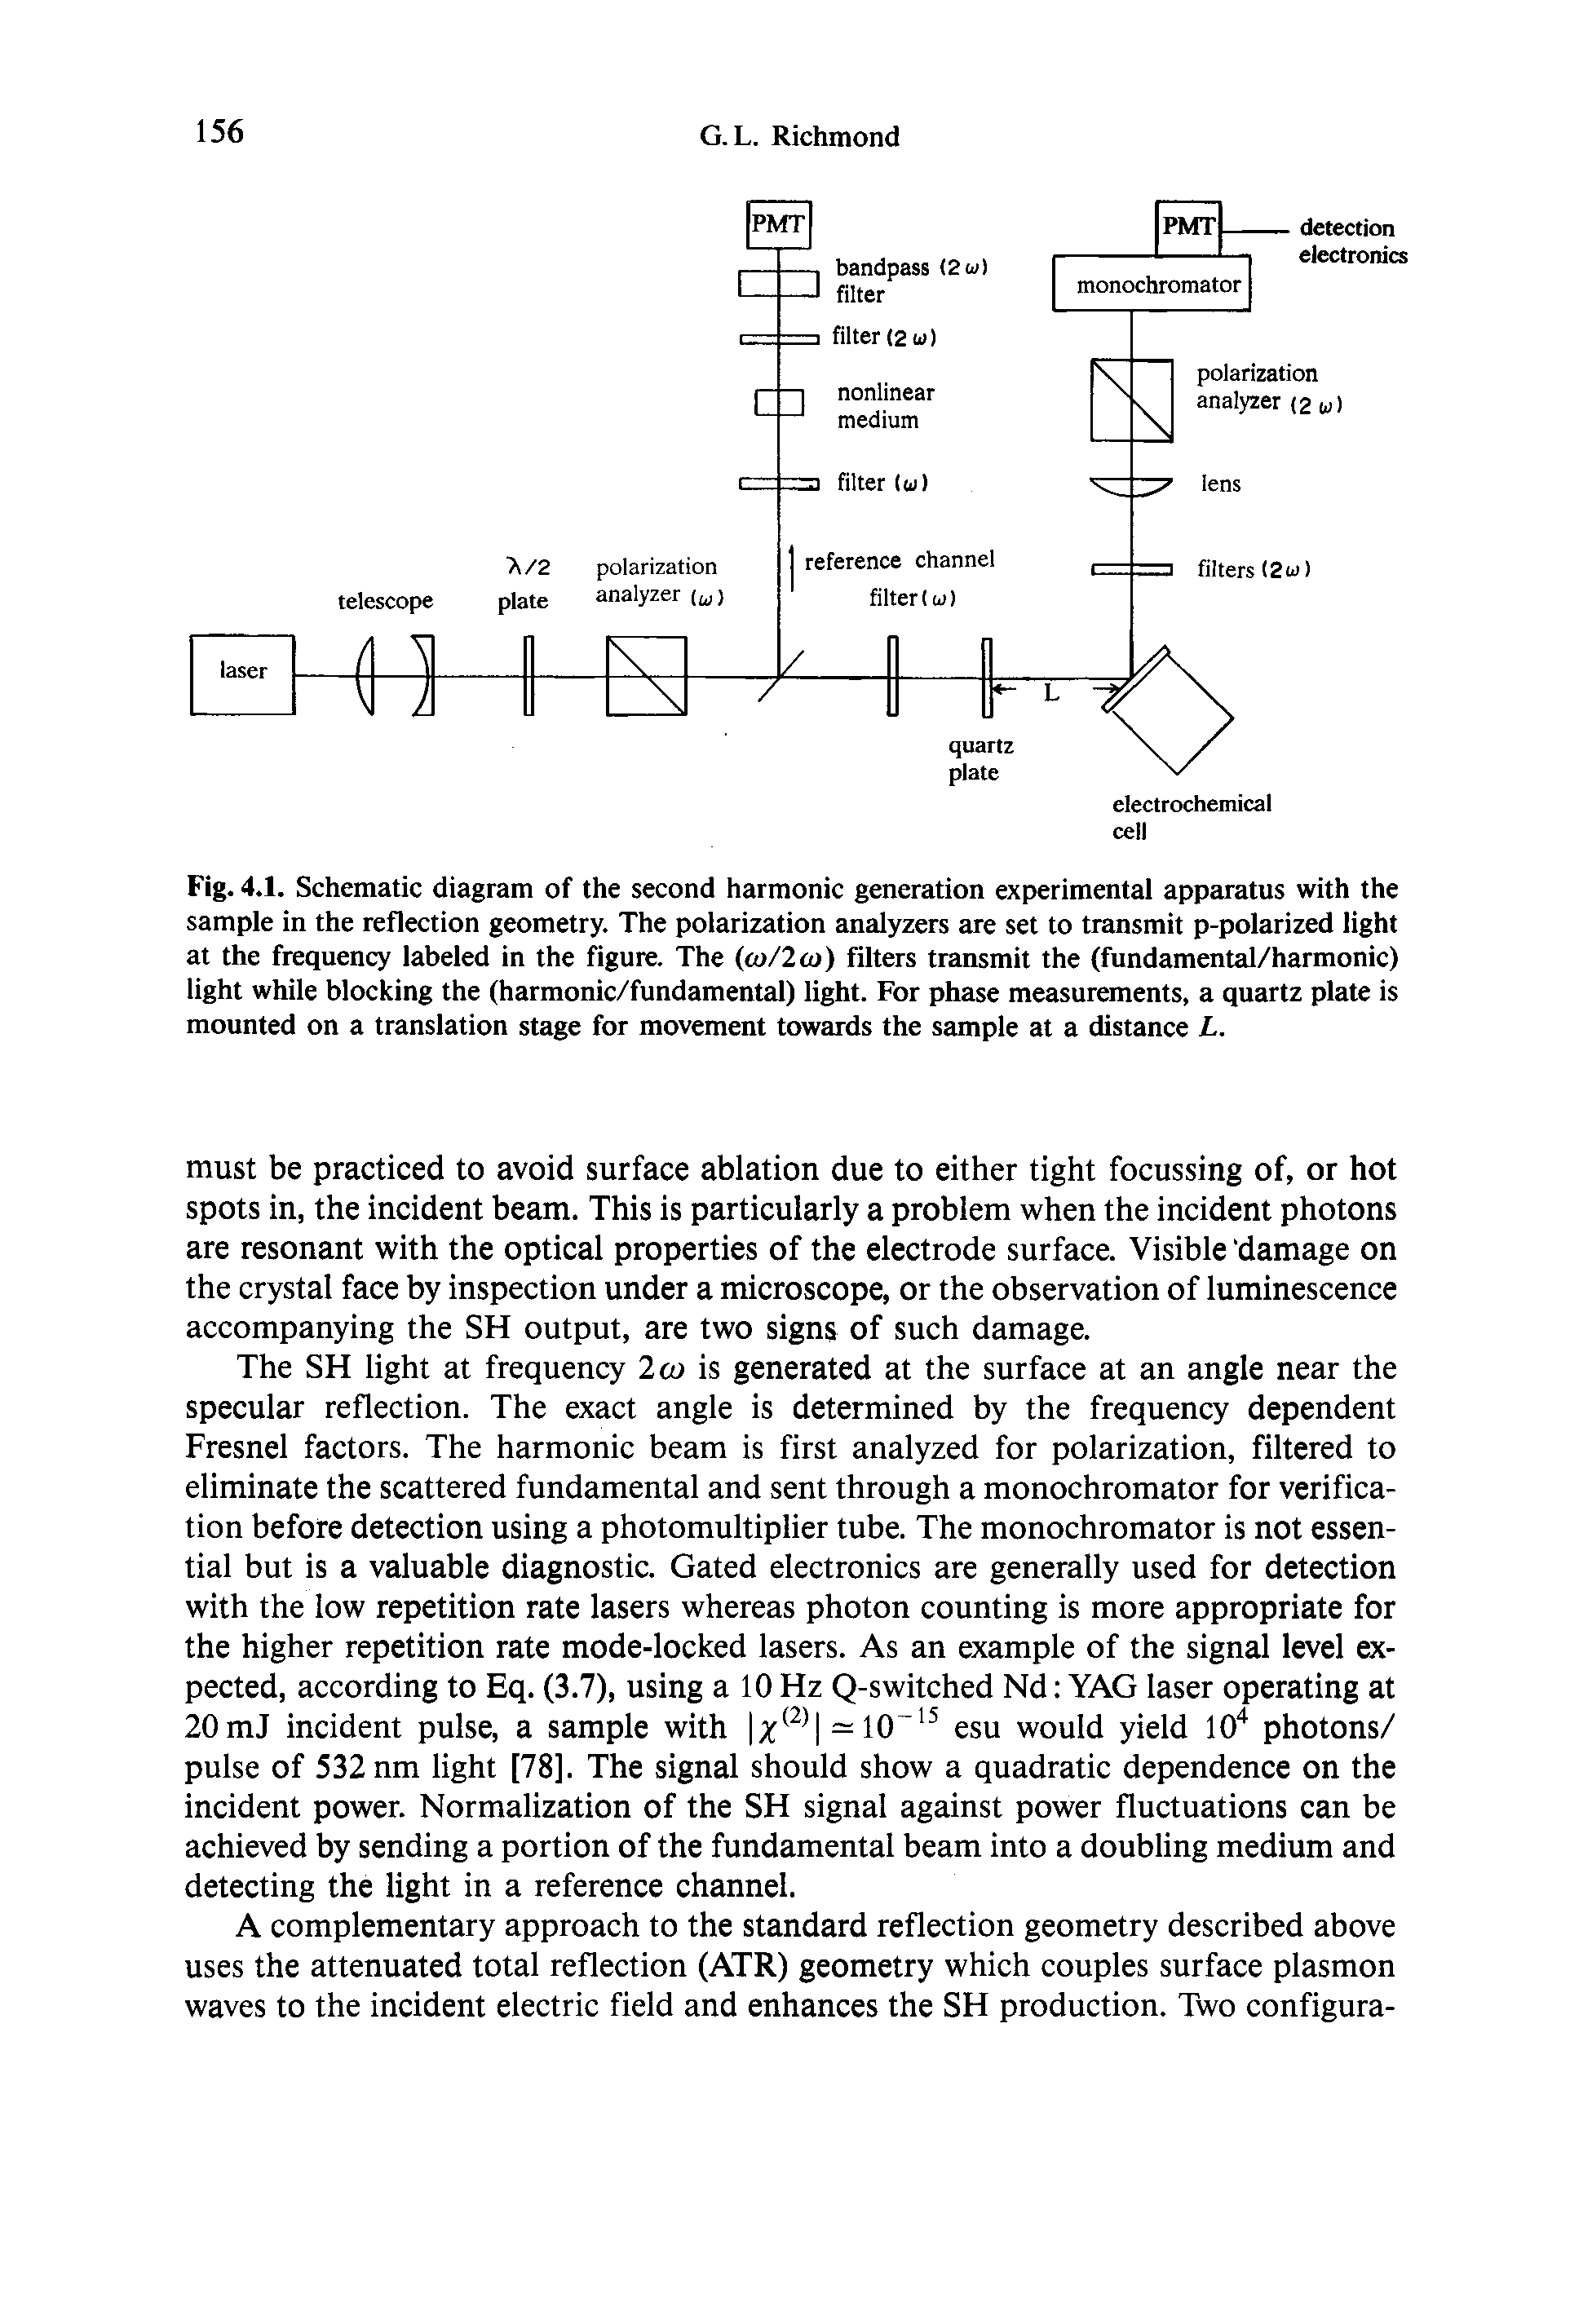 Fig. 4.1. Schematic diagram of the second harmonic generation experimental apparatus with the sample in the reflection geometry. The polarization analyzers are set to transmit p-polarized light at the frequency labeled in the figure. The (co/2co) filters transmit the (fundamental/harmonic) light while blocking the (harmonic/fundamental) light. For phase measurements, a quartz plate is mounted on a translation stage for movement towards the sample at a distance L.